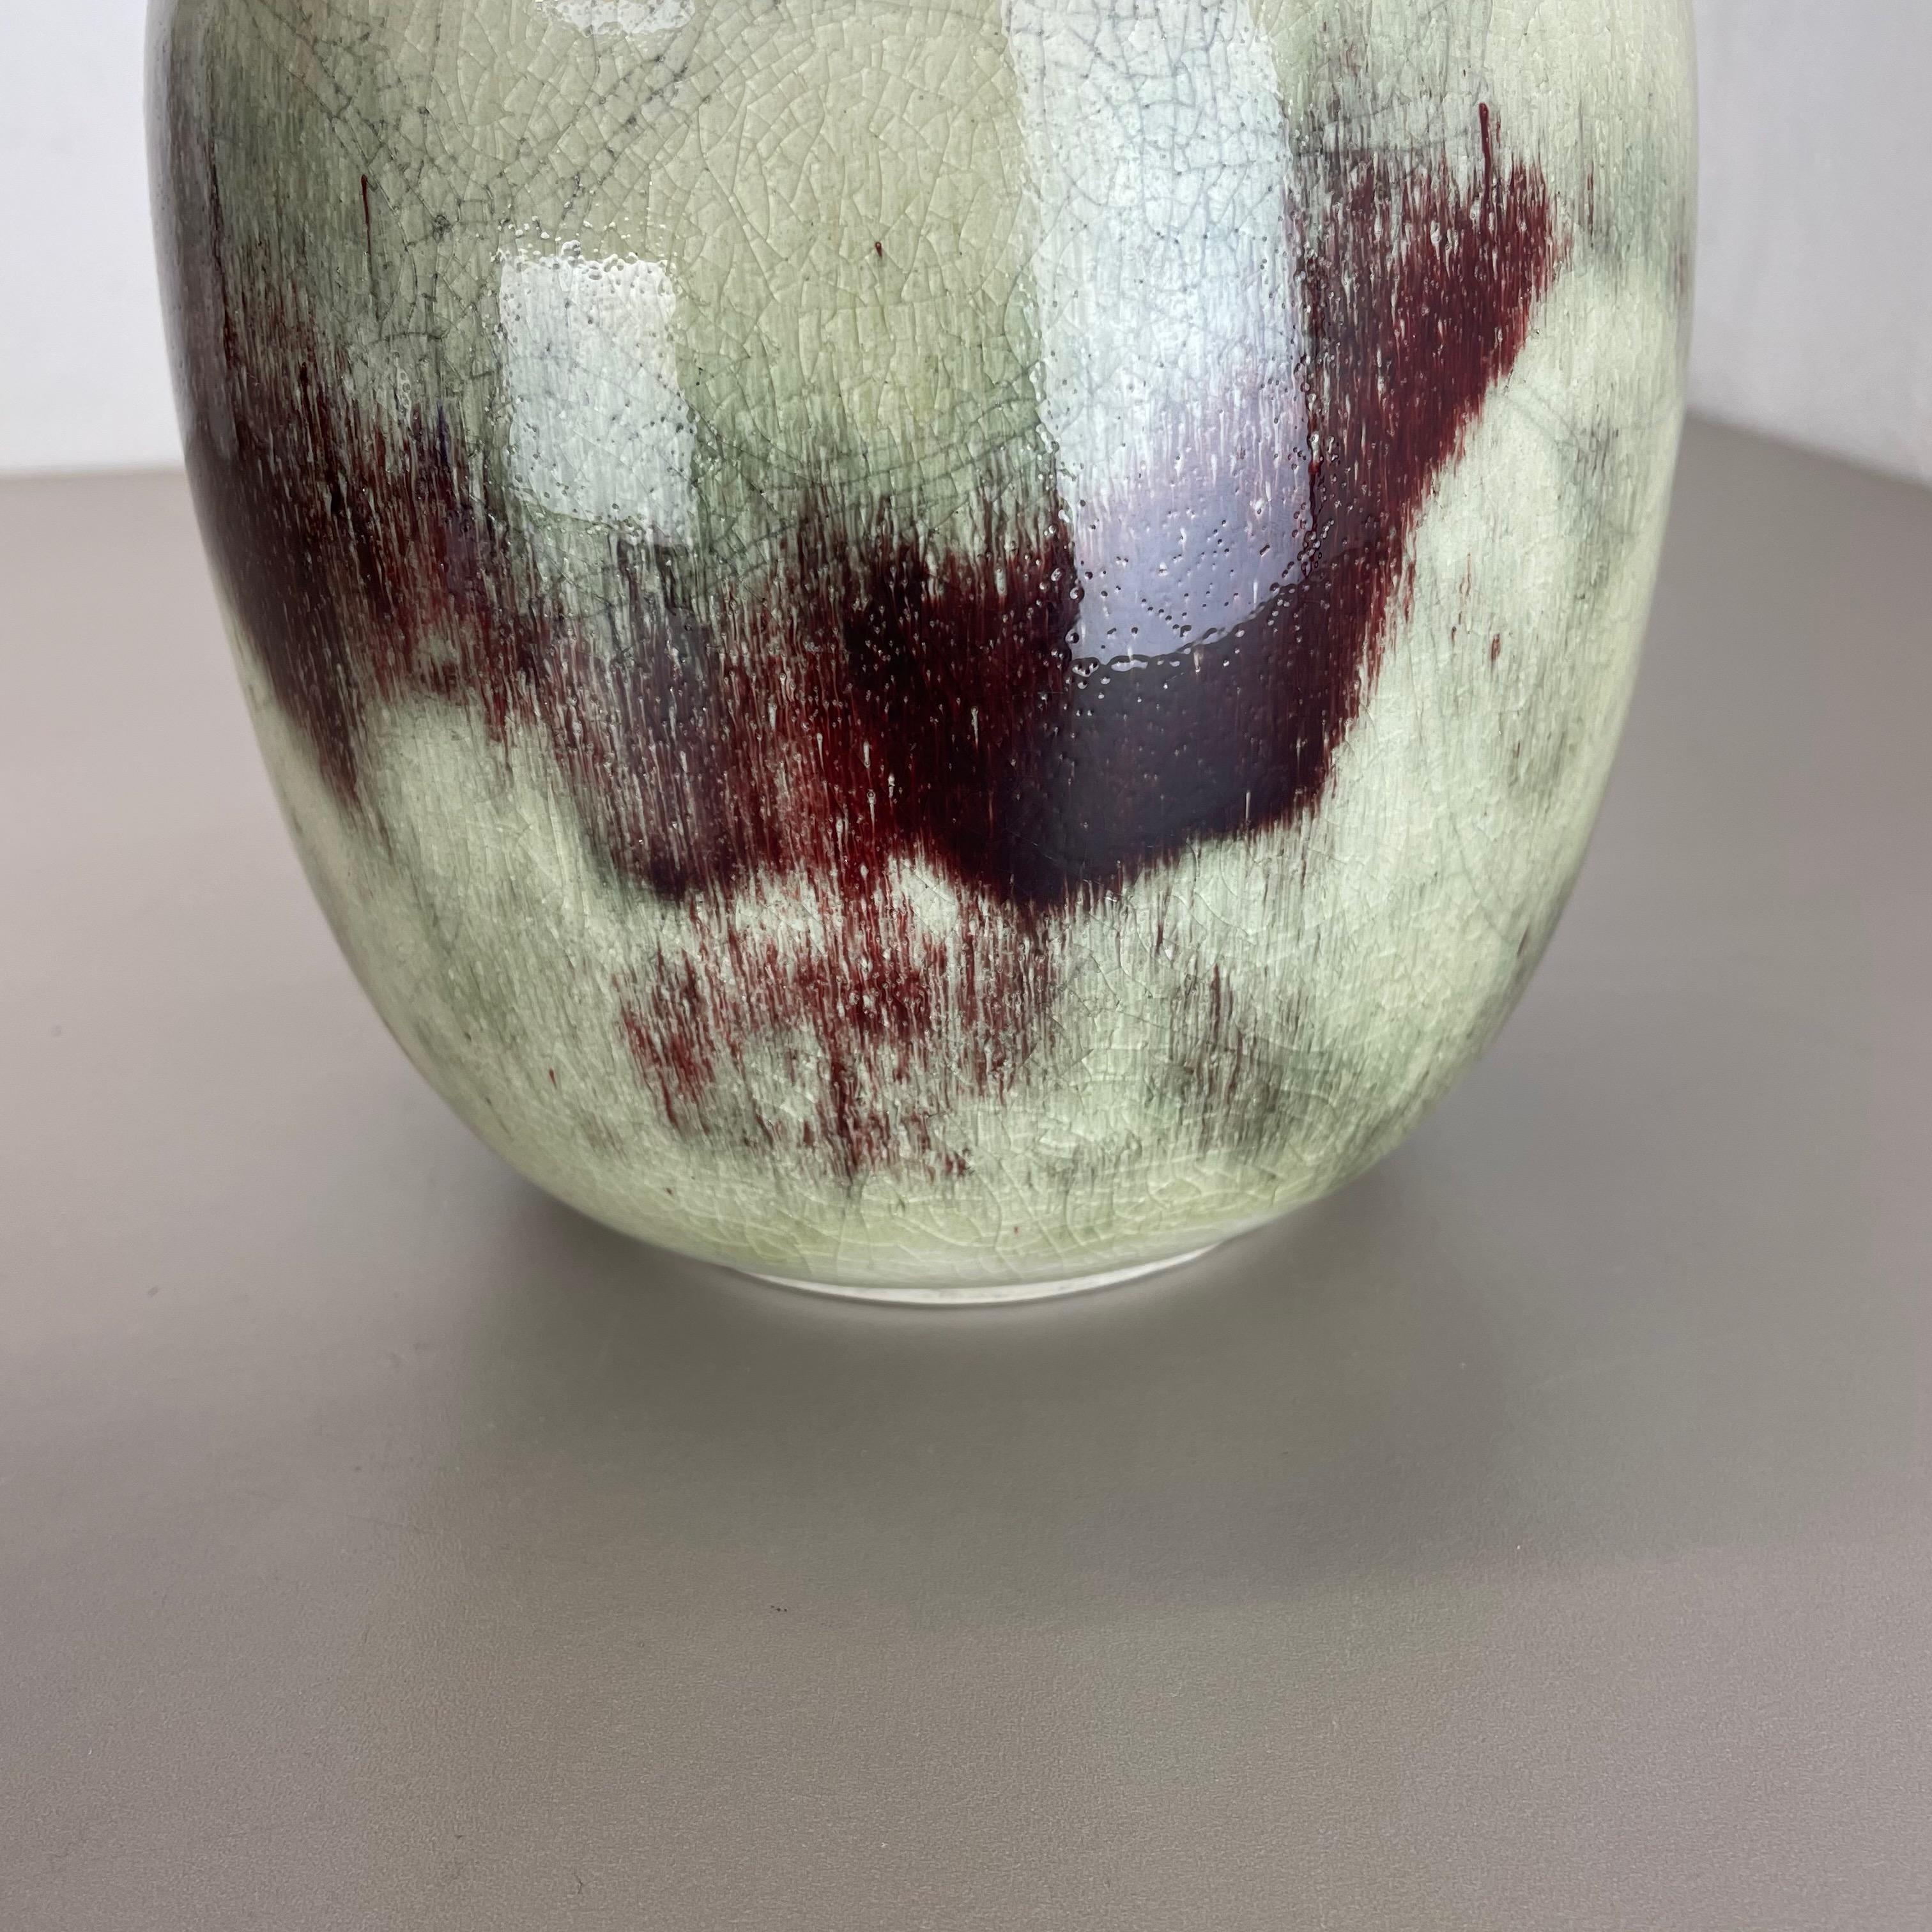 Unique Abstract Bauhaus Vase Pottery by WMF Ikora, Germany 1930s Art Deco For Sale 3